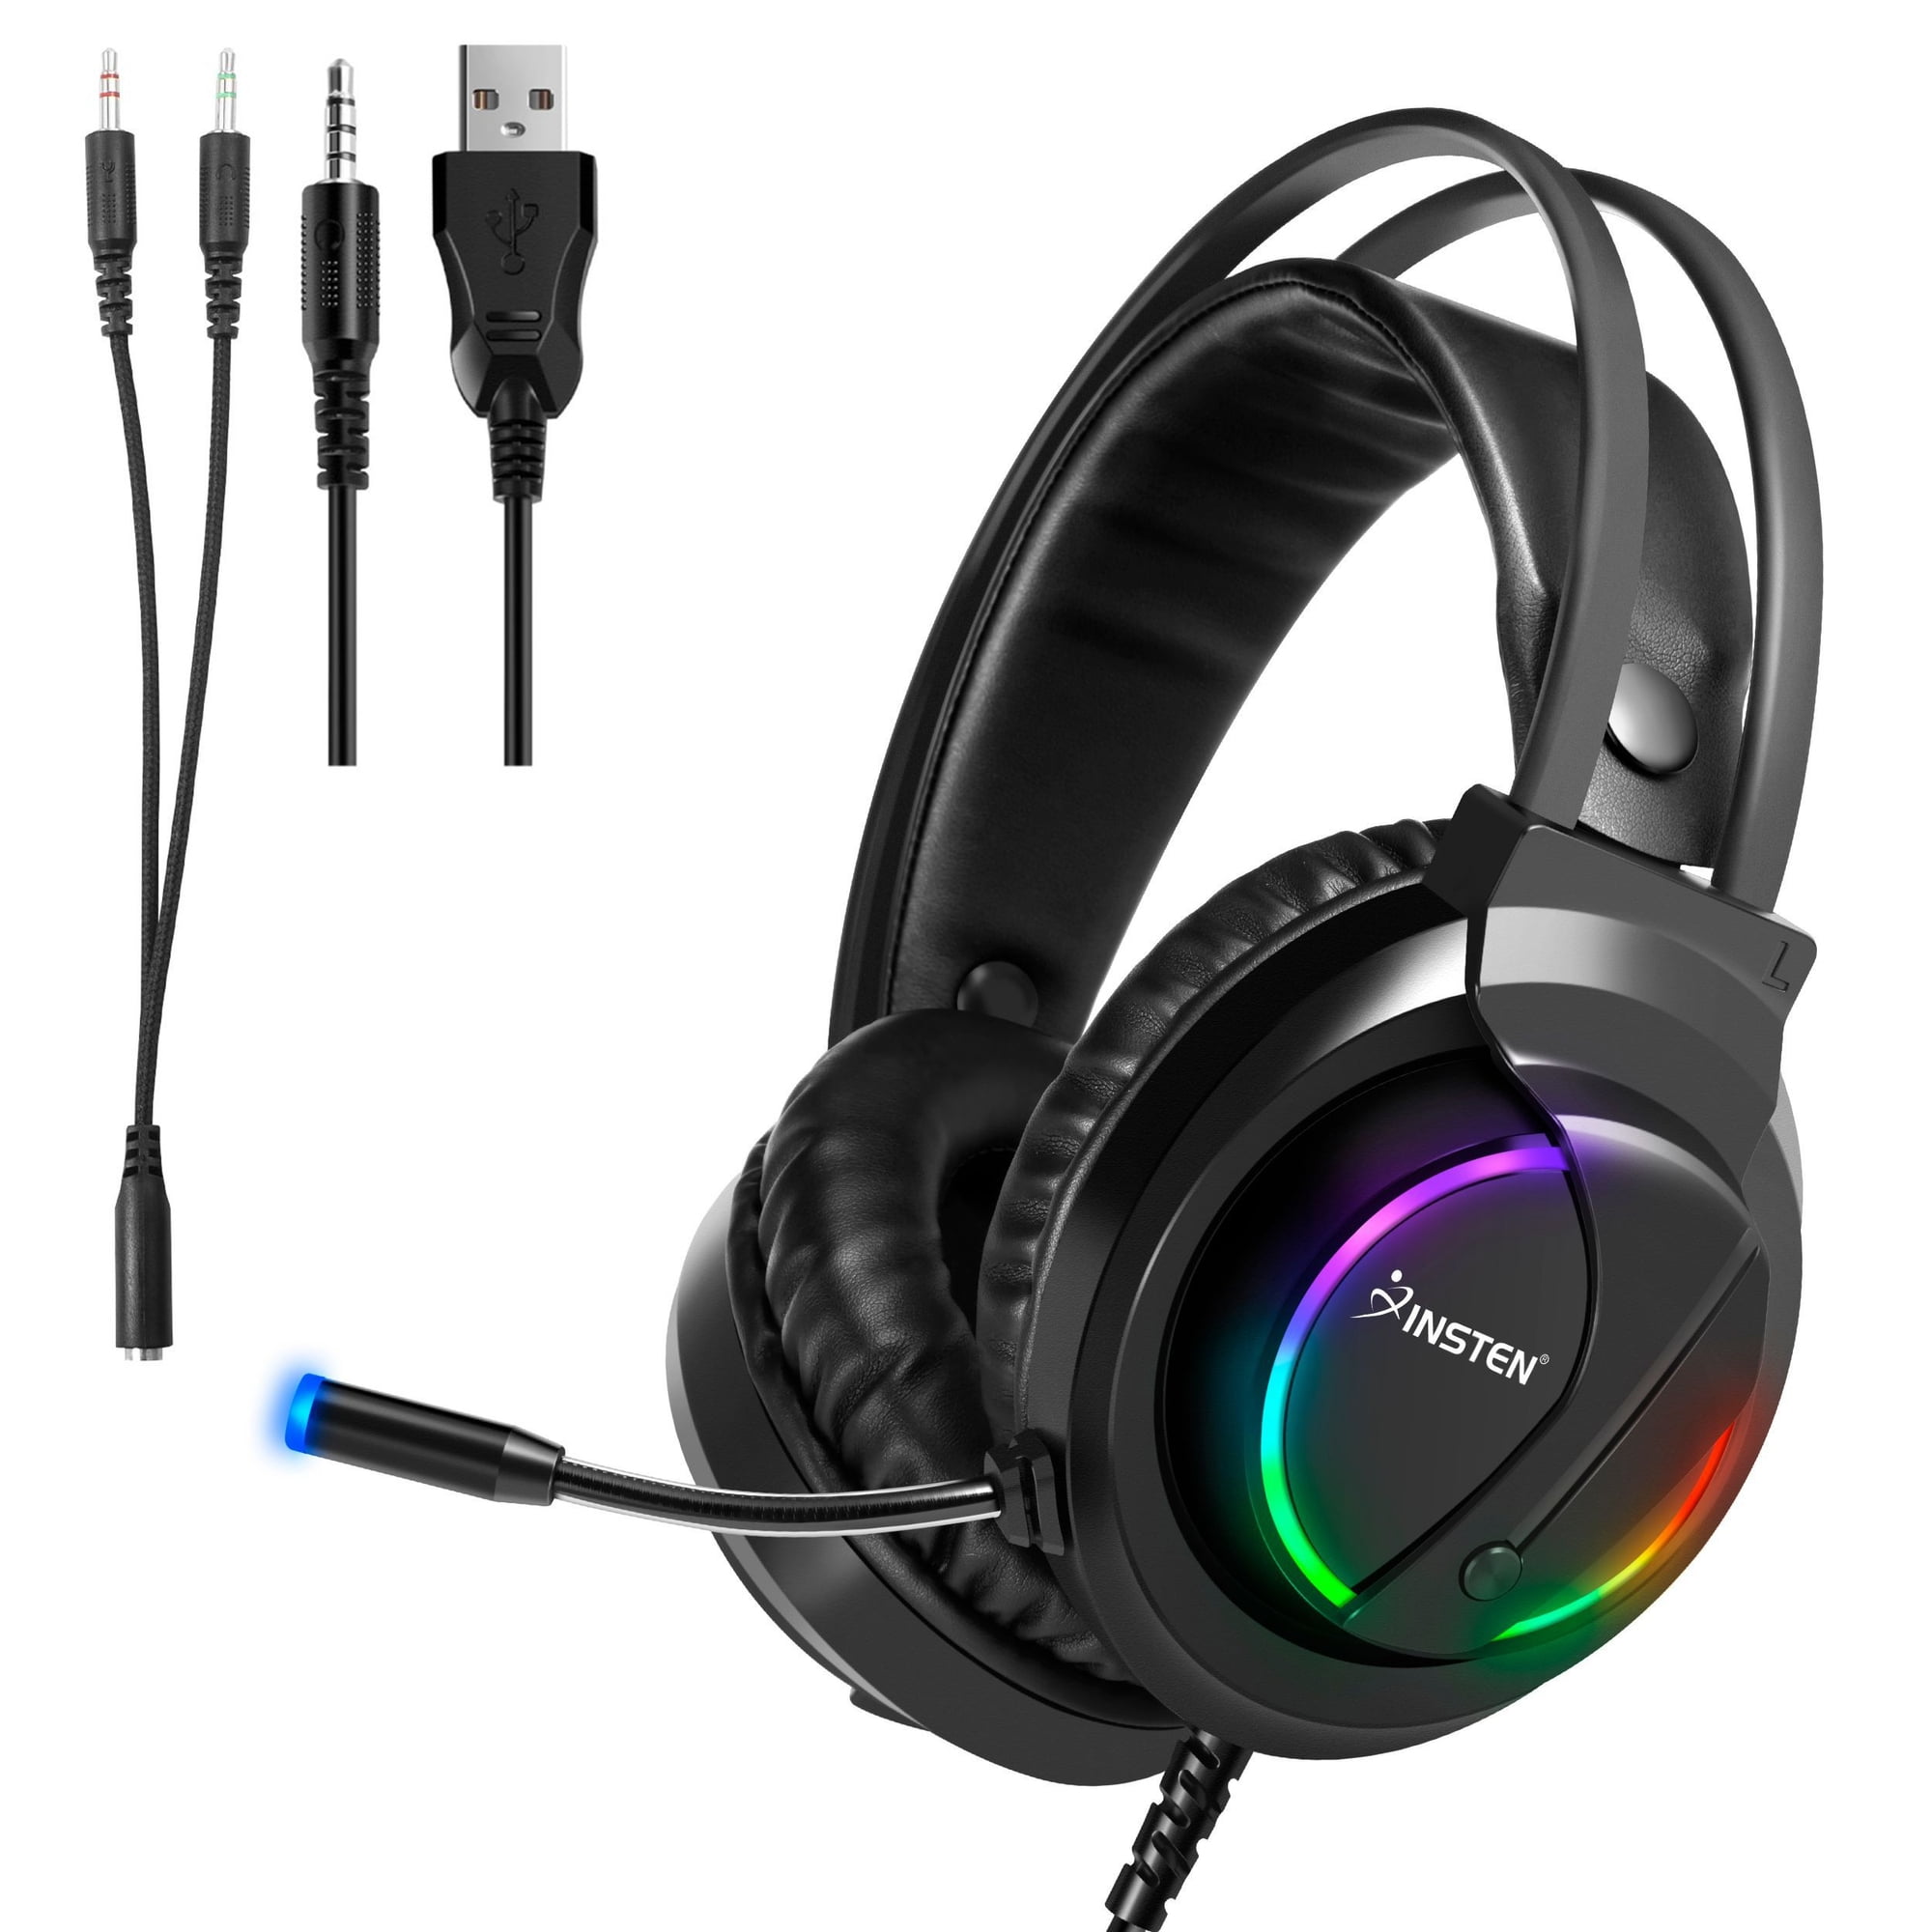 Wired Gamer Headphones - Led Cat Ear Volume Control Professional